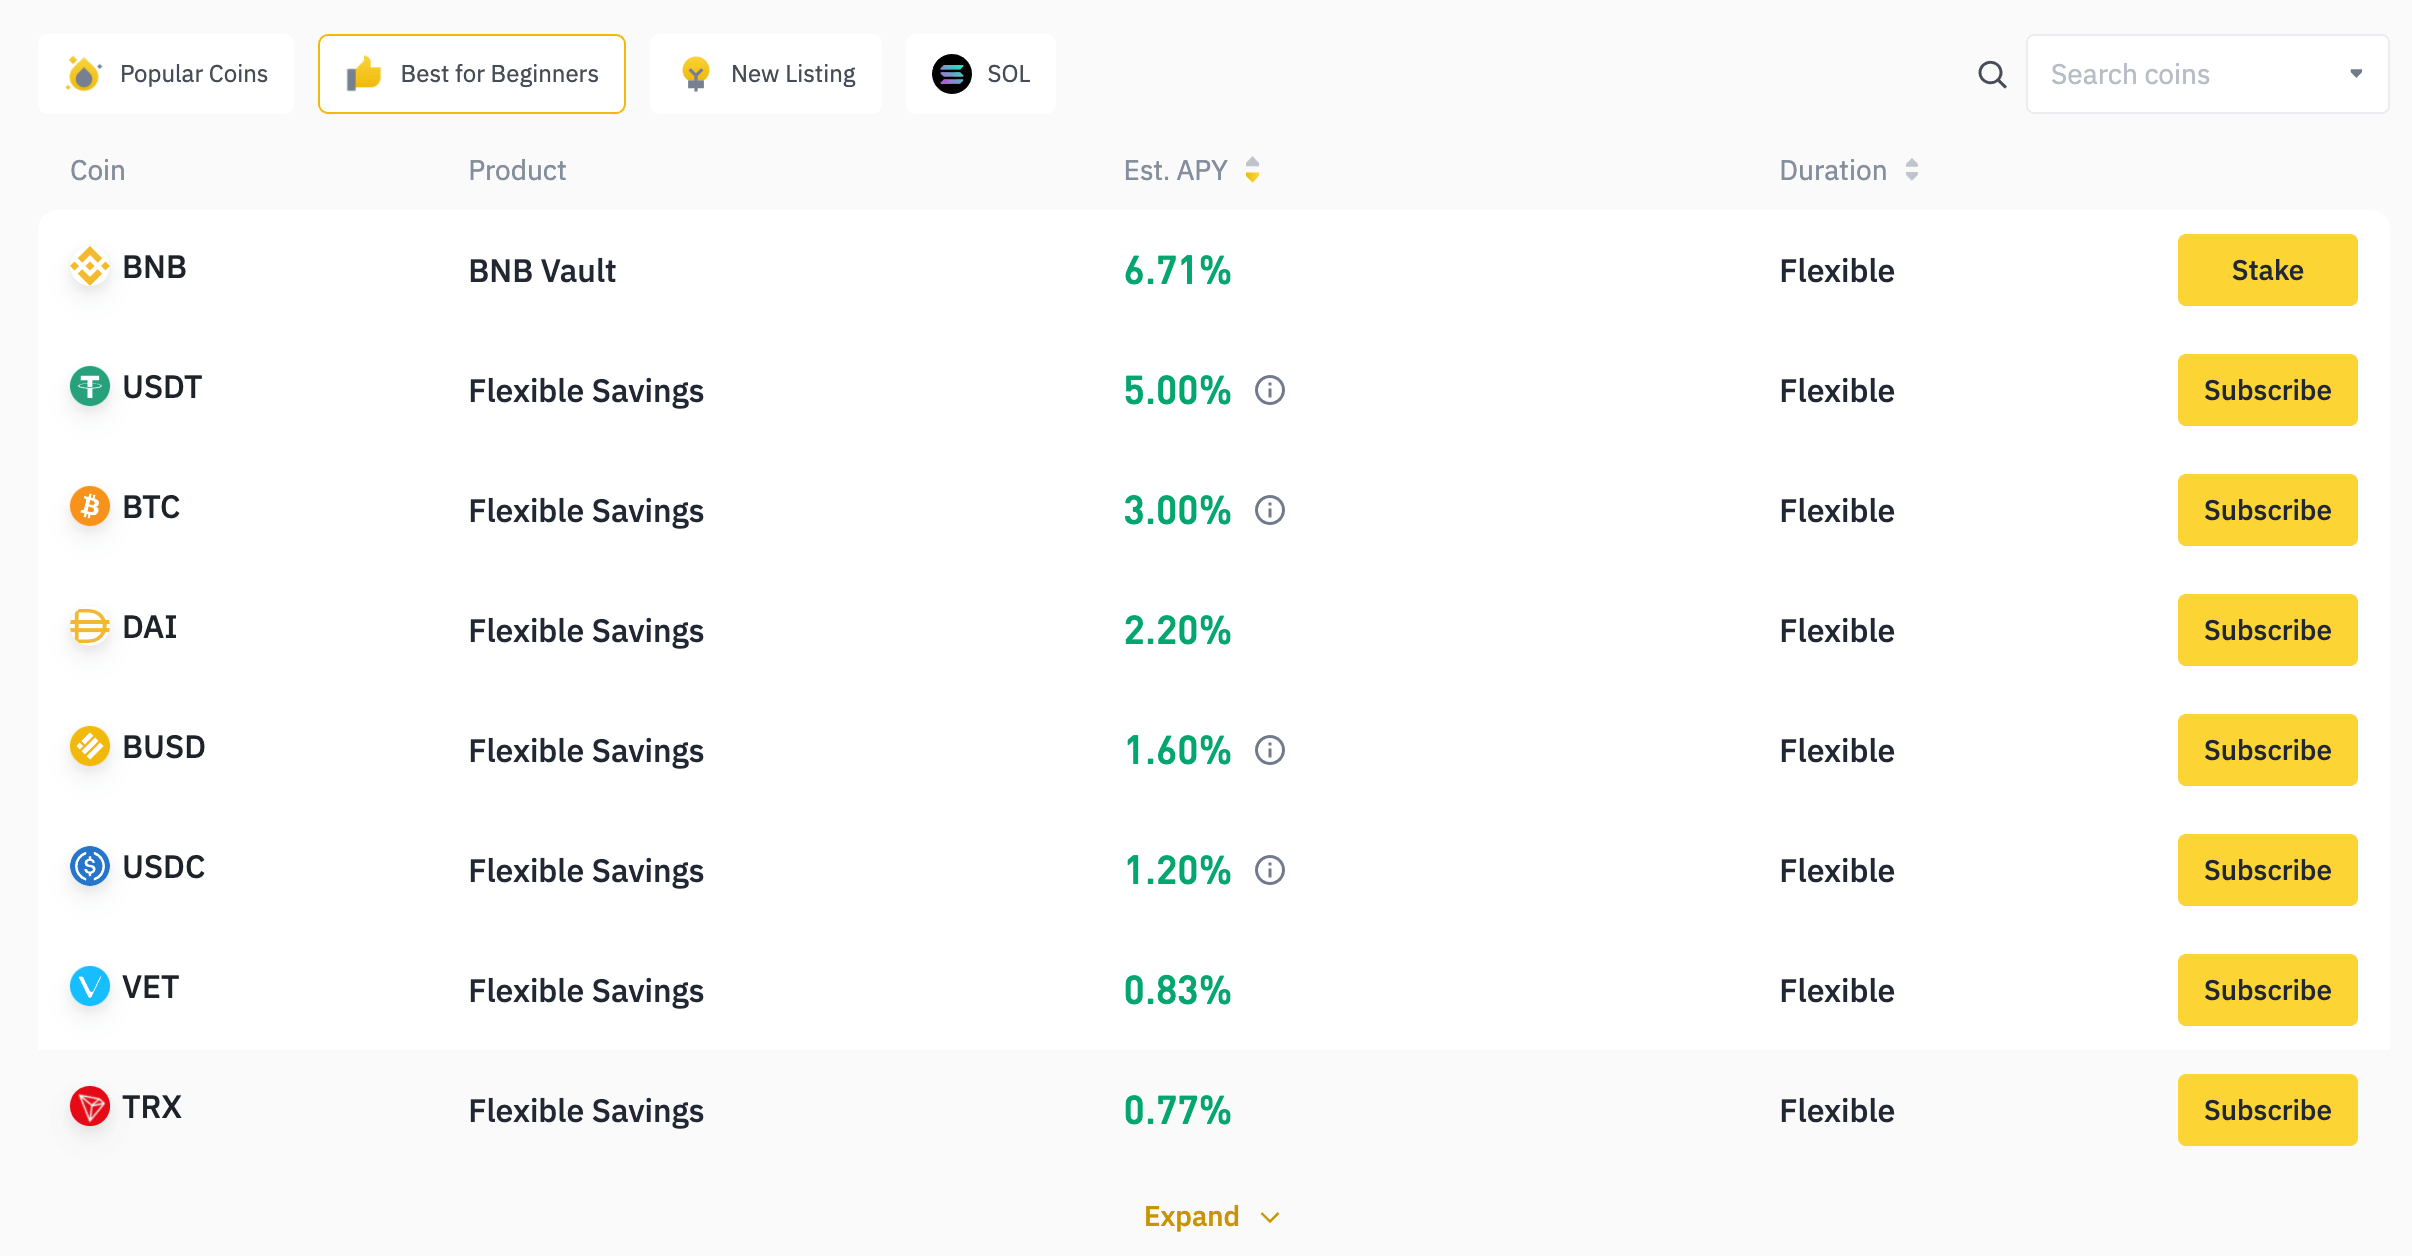 Binance Savings for Beginners. The image shows a listing of flexible savings products on Binance. The interest rates range from 0.77% for TRX to 6.71% for BNB.